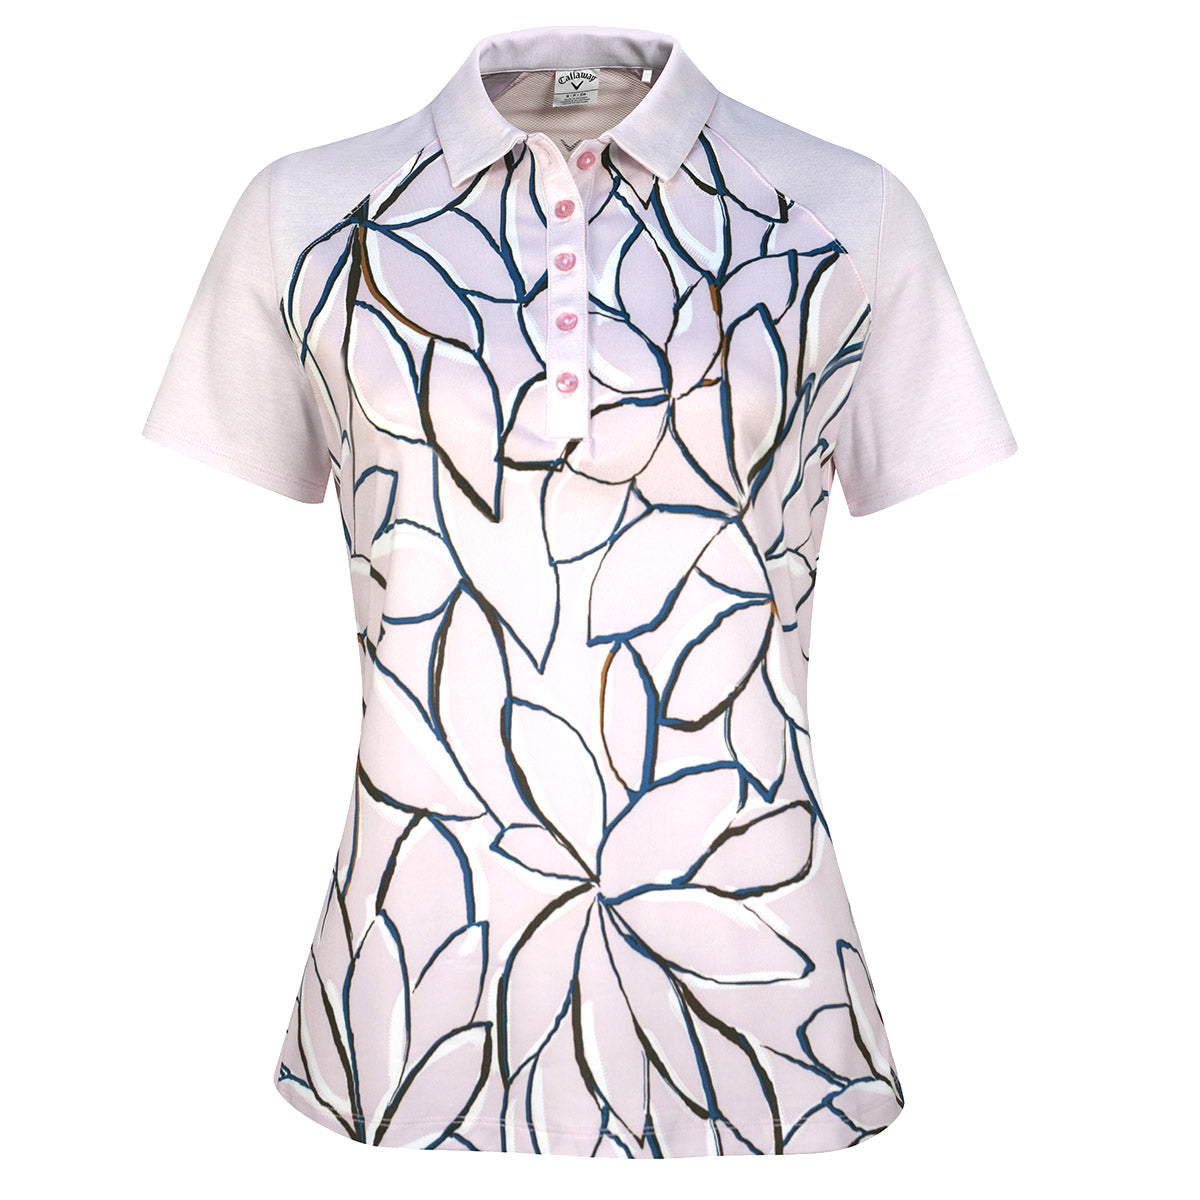 Callaway Ladies Short Sleeve Polo Shirt with Floral Pattern in Pink Nectar